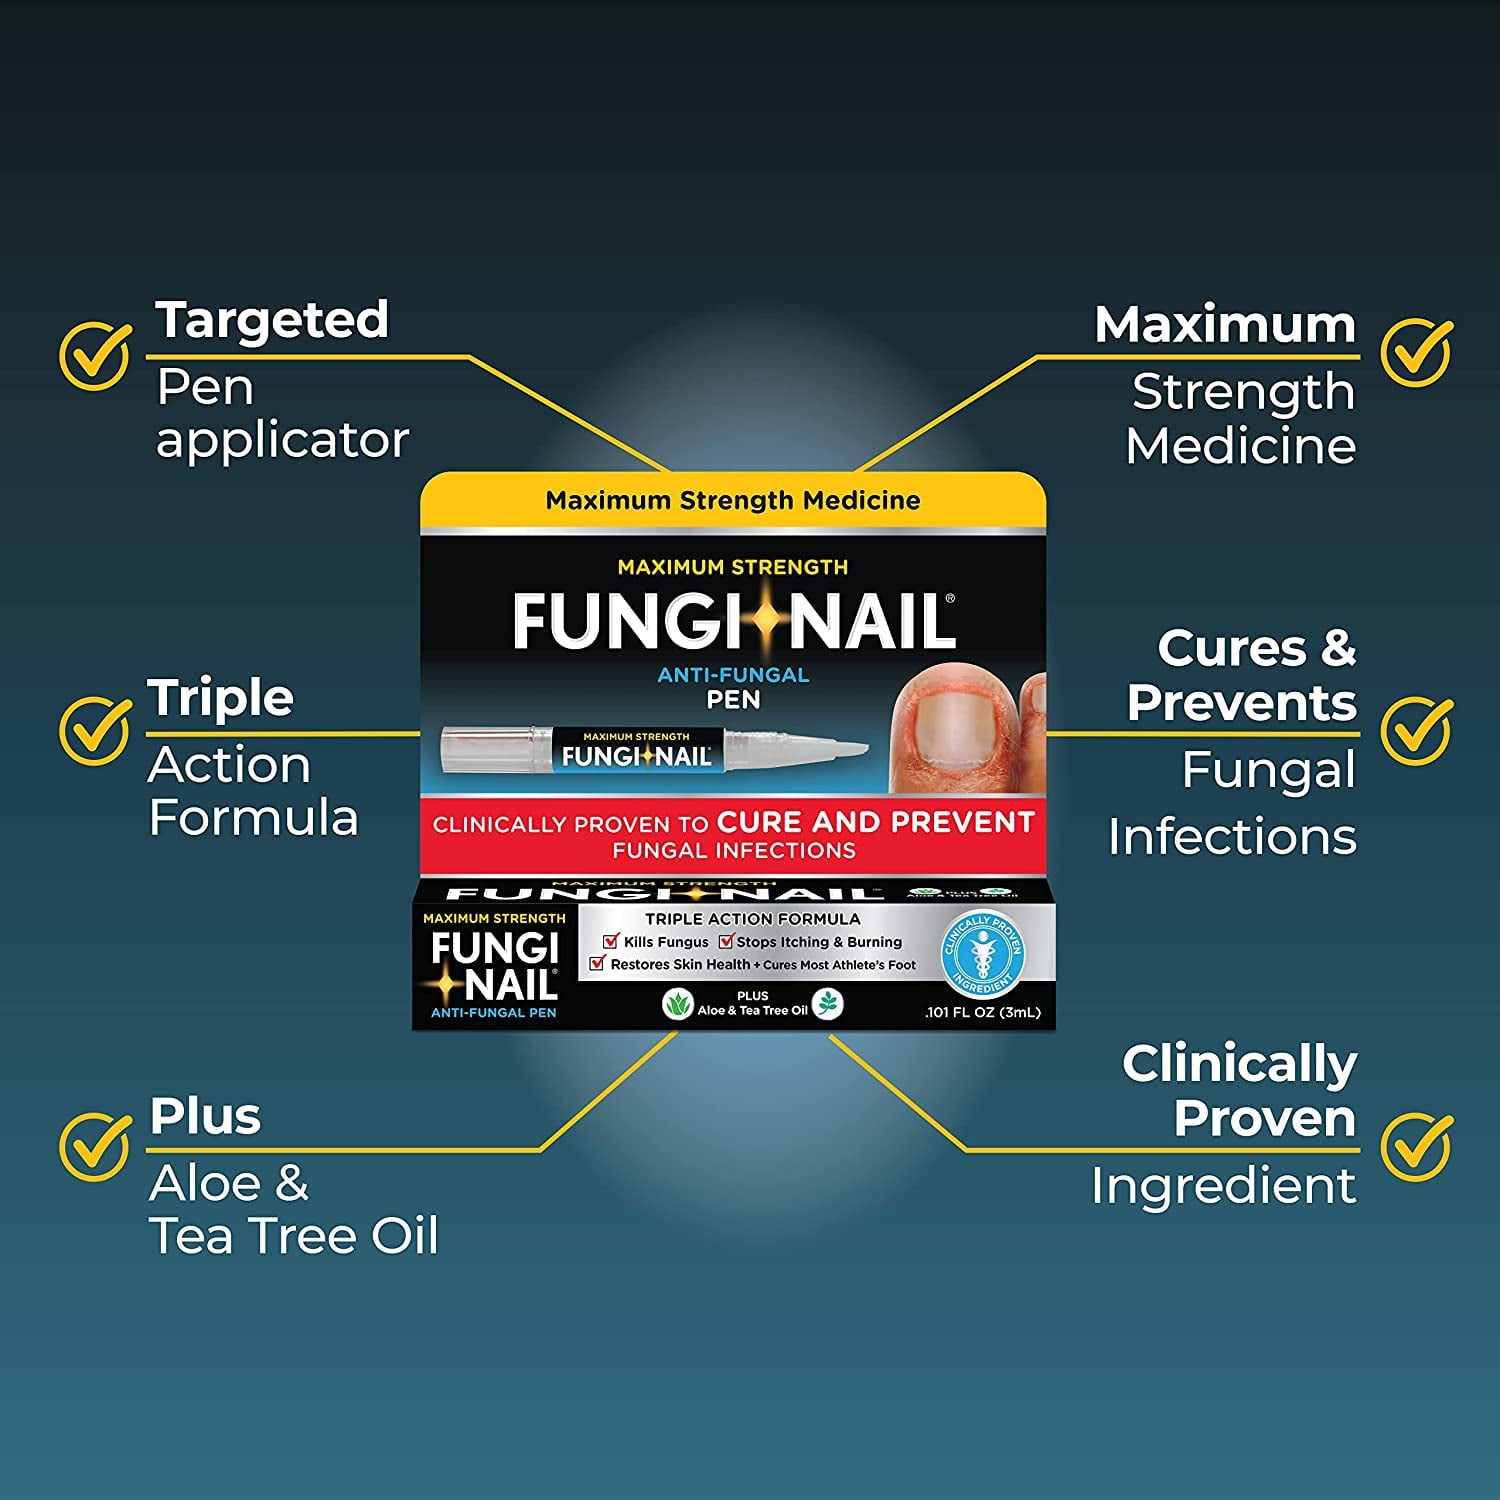 Fungi-Nail Pen Applicator Anti-Fungal Solution, 0.10 Ounce - Kills Fungus  That Can Lead To Nail Fungus & Athlete's Foot Undecylenic Acid & Clinically  Proven to Cure Fungal Infections : Amazon.sg: Health, Household